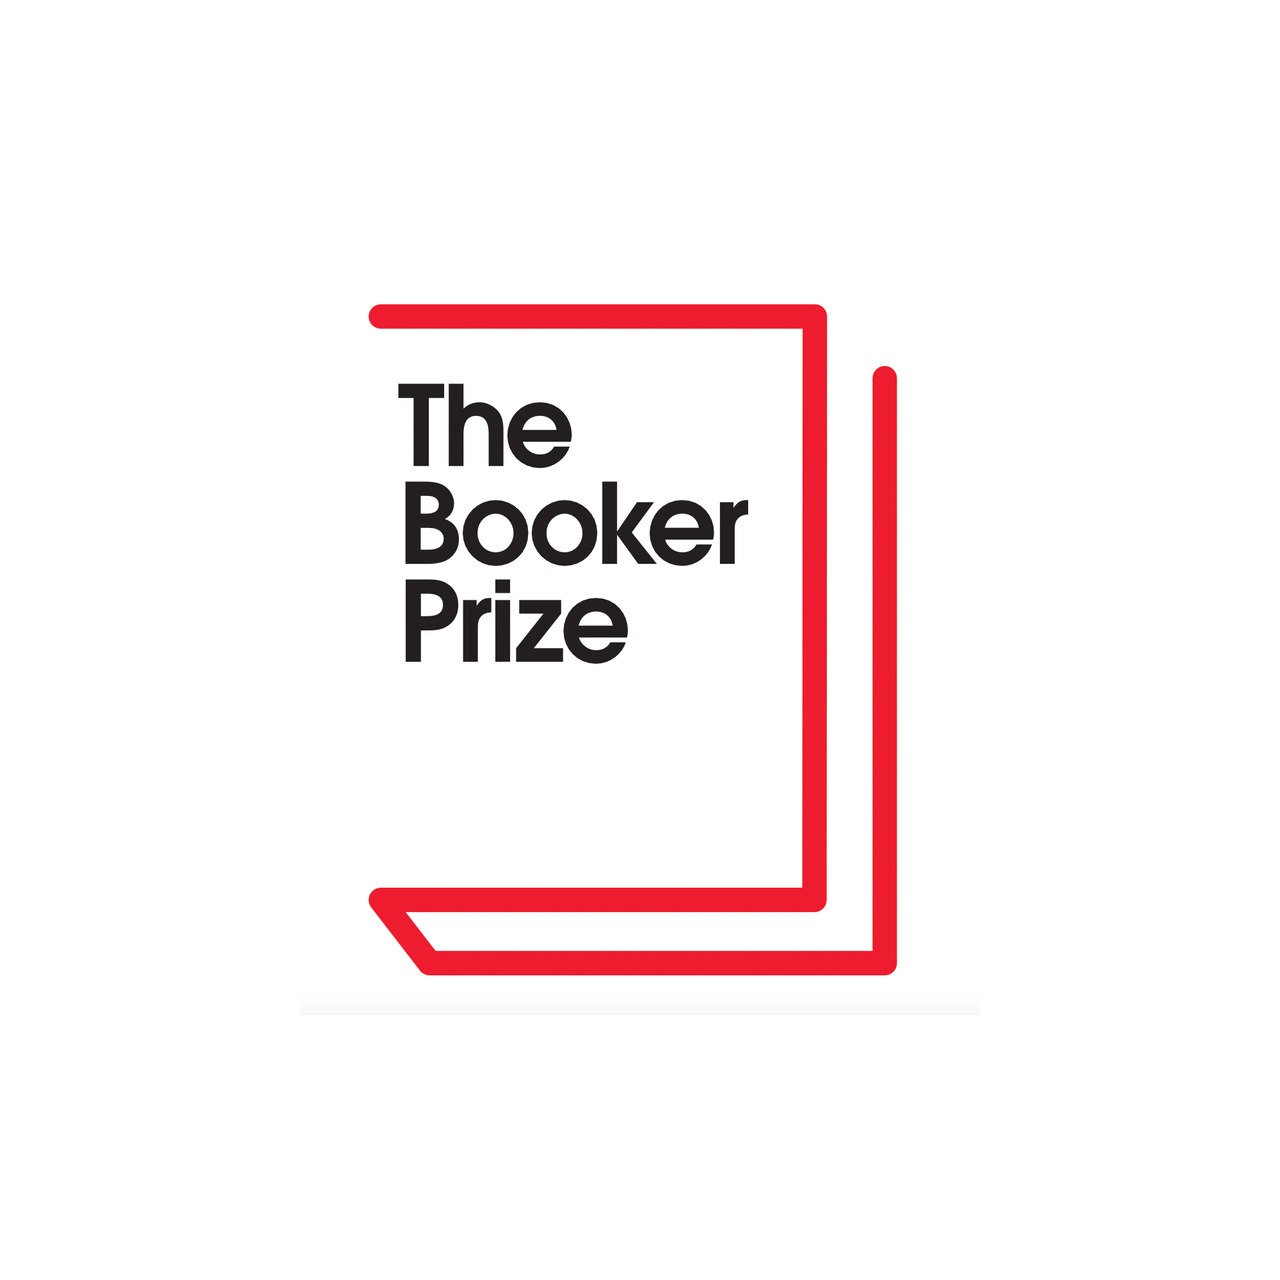 Artwork for The Booker Prizes